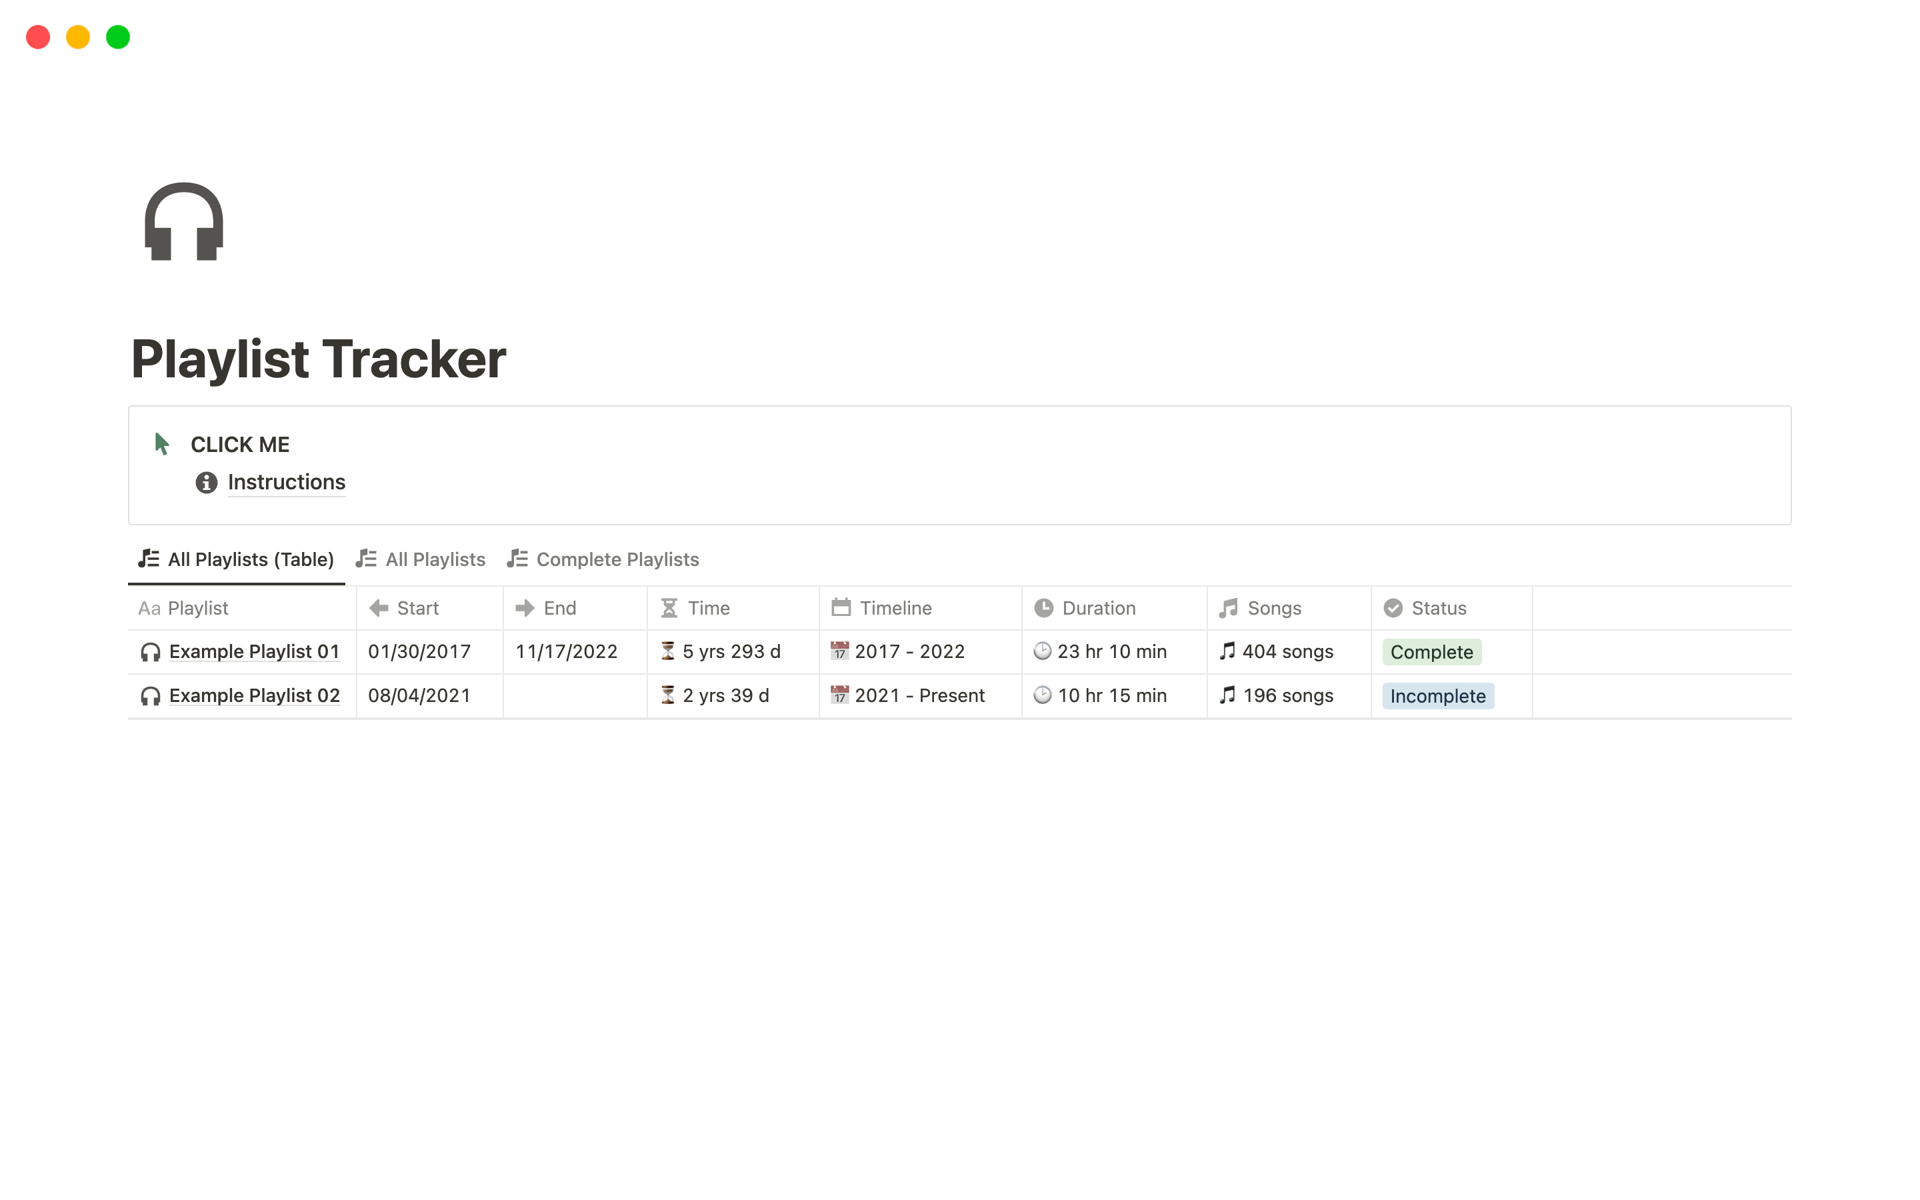 This template allows the user to track their music playlists.